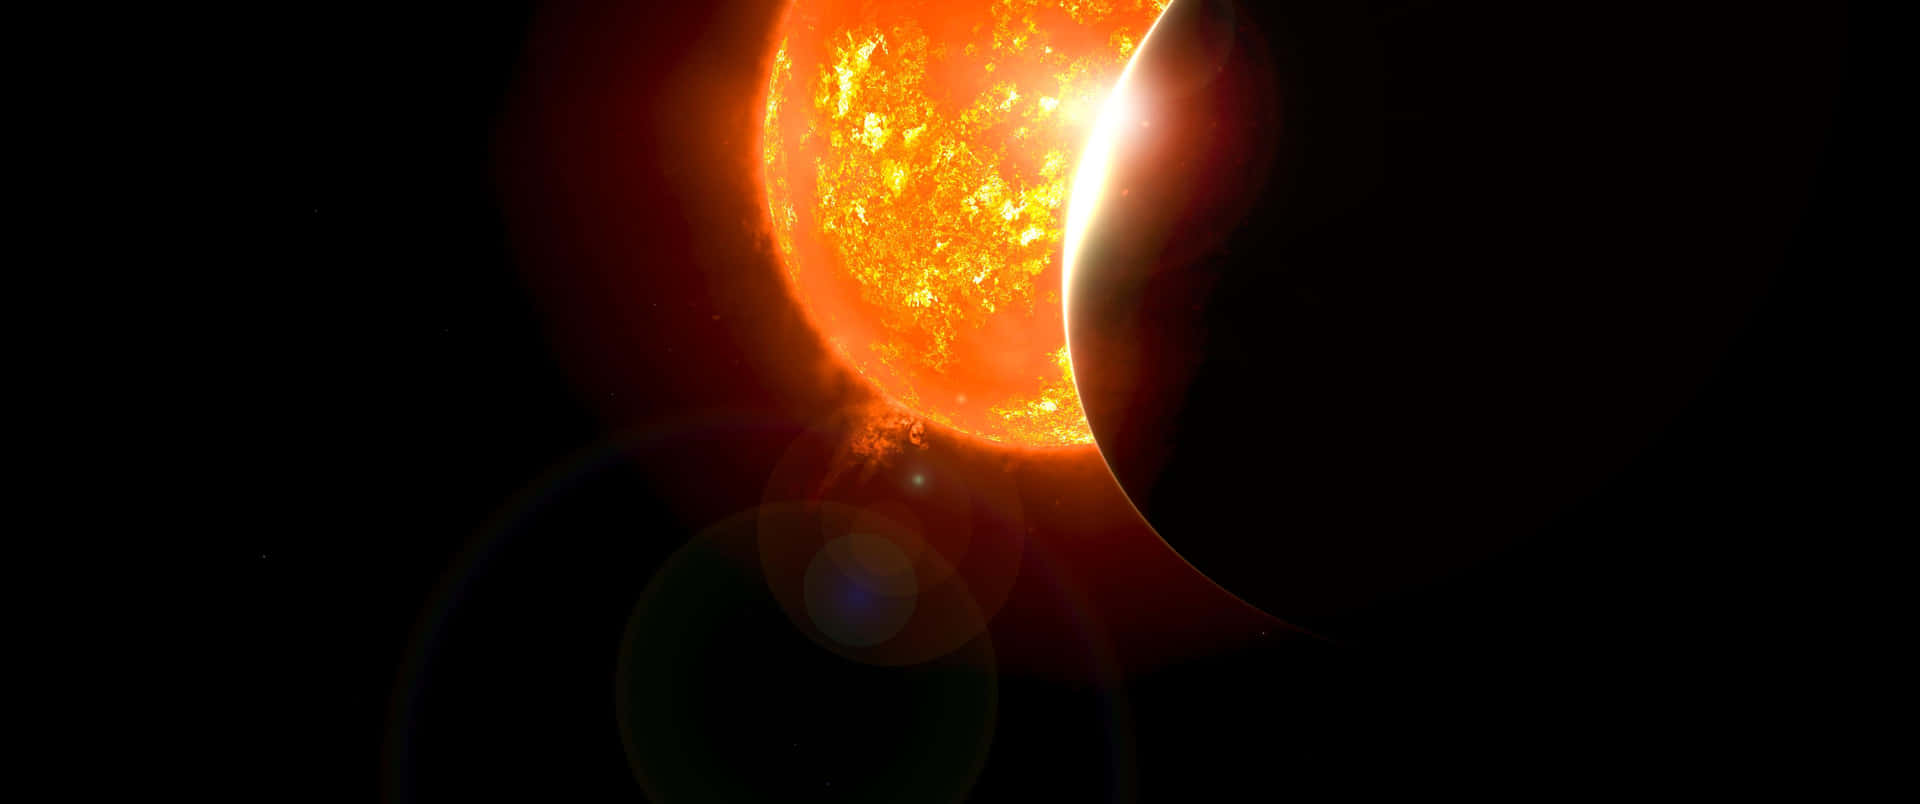 3440x1440 Space With Sun During Eclipse Wallpaper